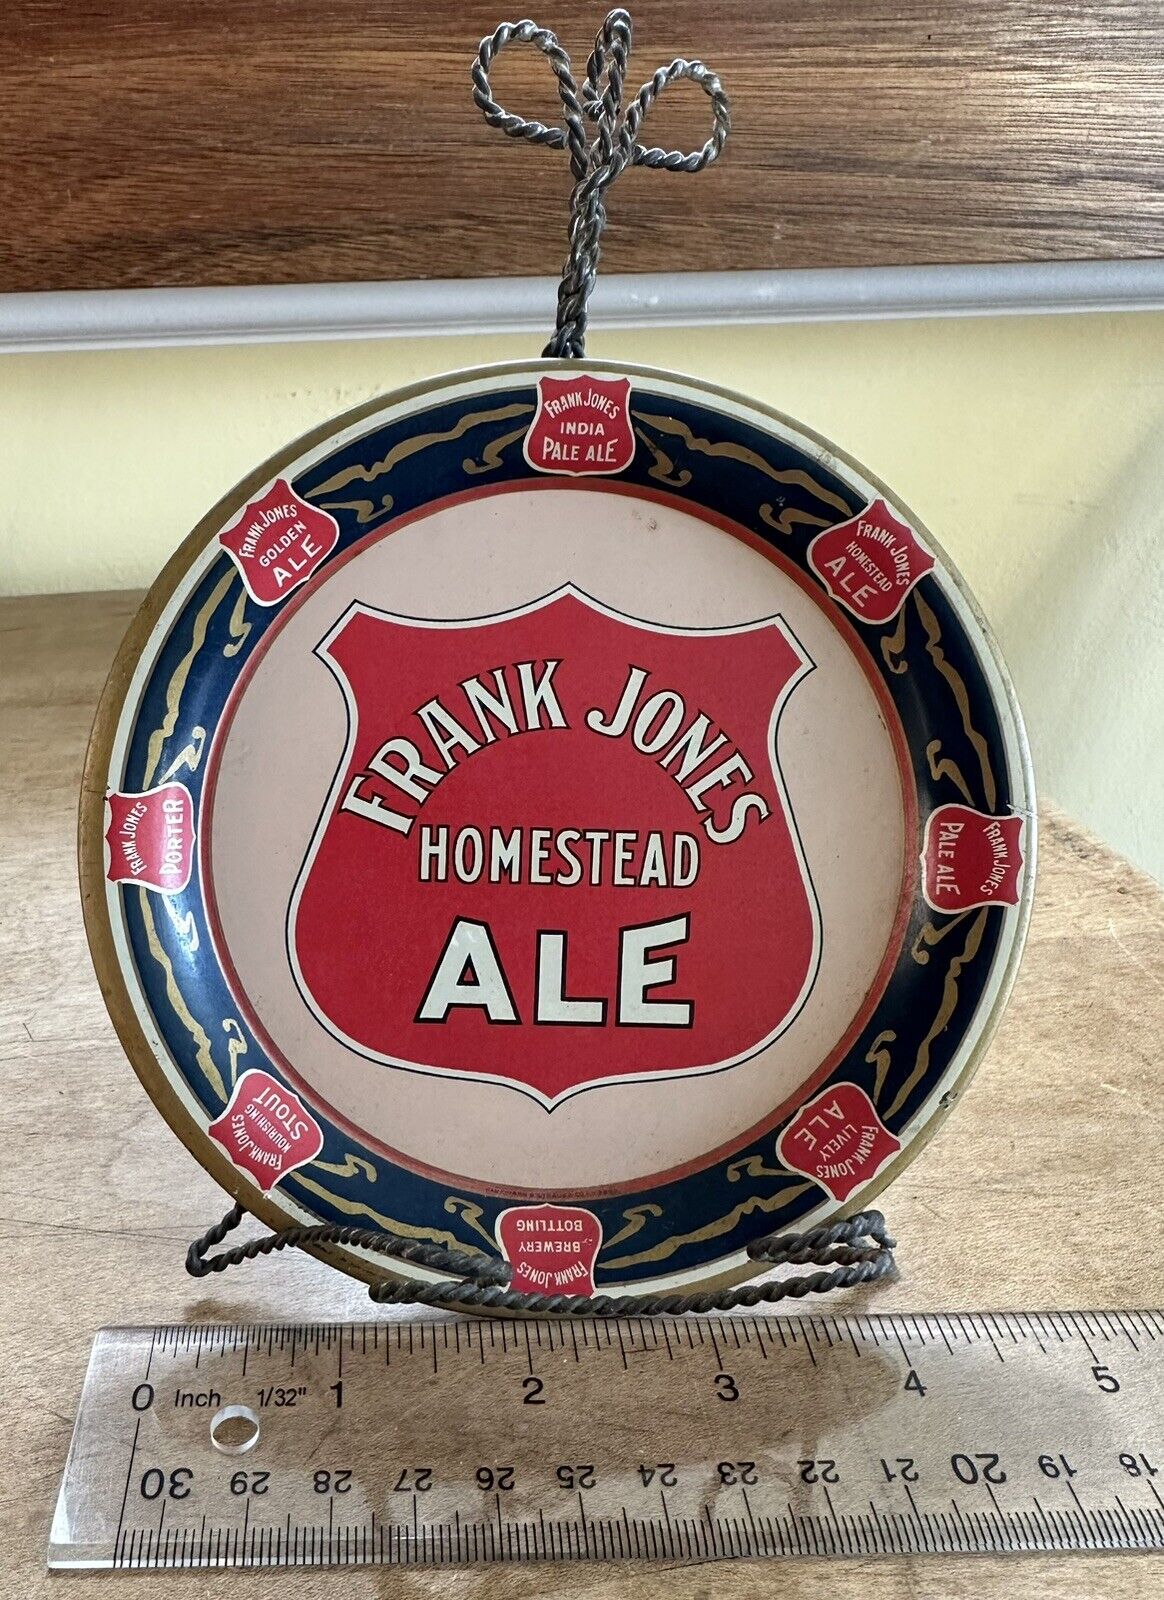 Excellent Condition Frank Jones Ale Brewery Tip Tray + Original Metal Stand